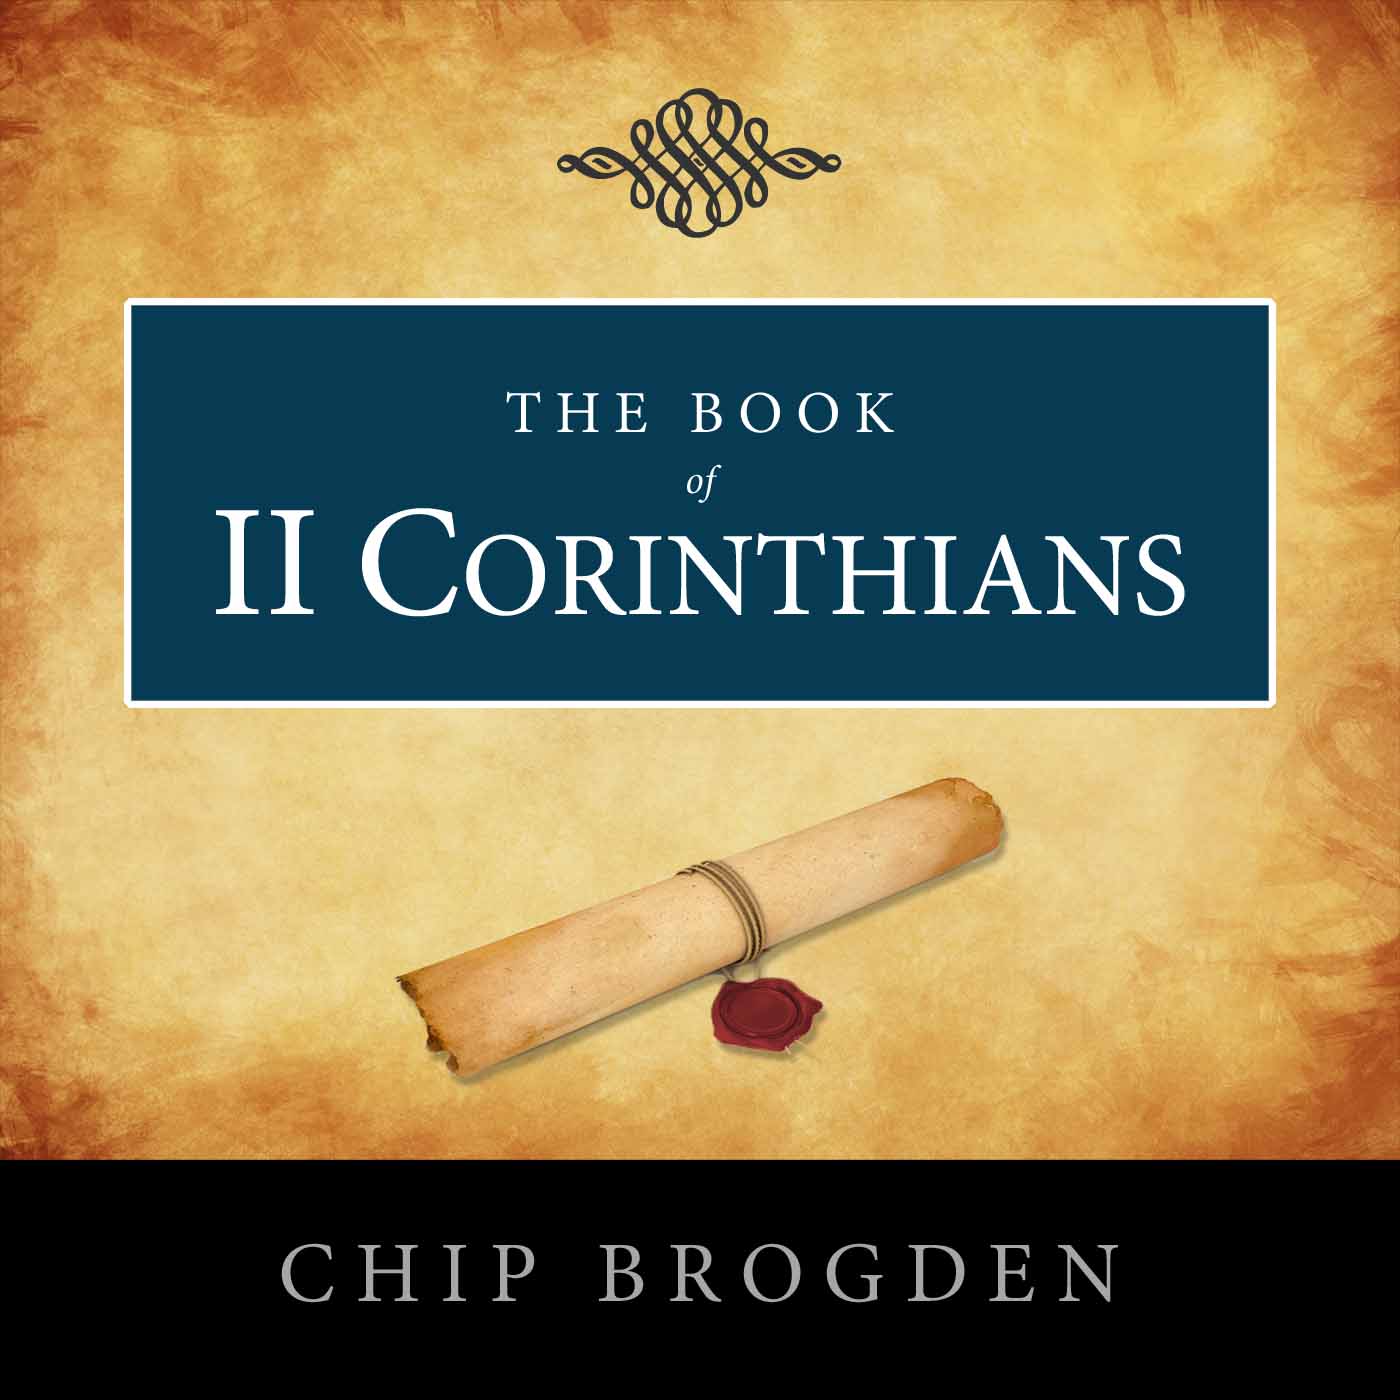 The Book of Second Corinthians